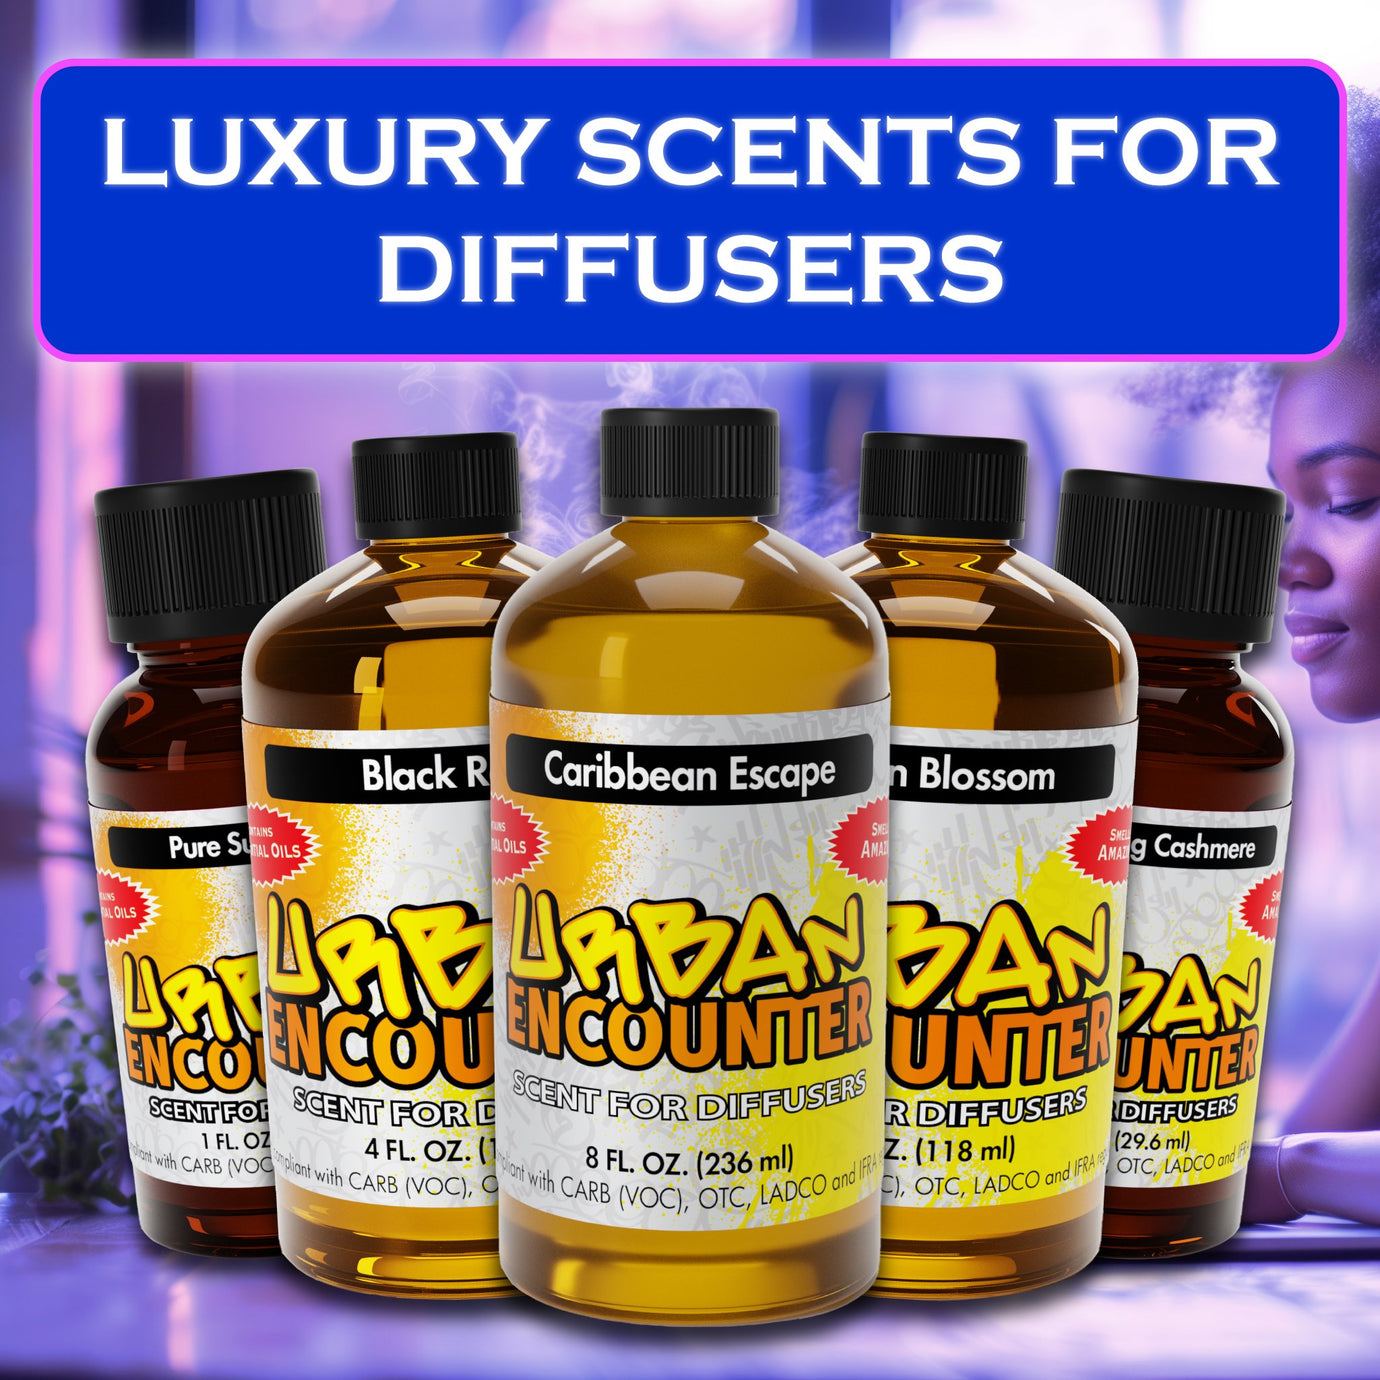 Urban Encounter Scents for Diffusers